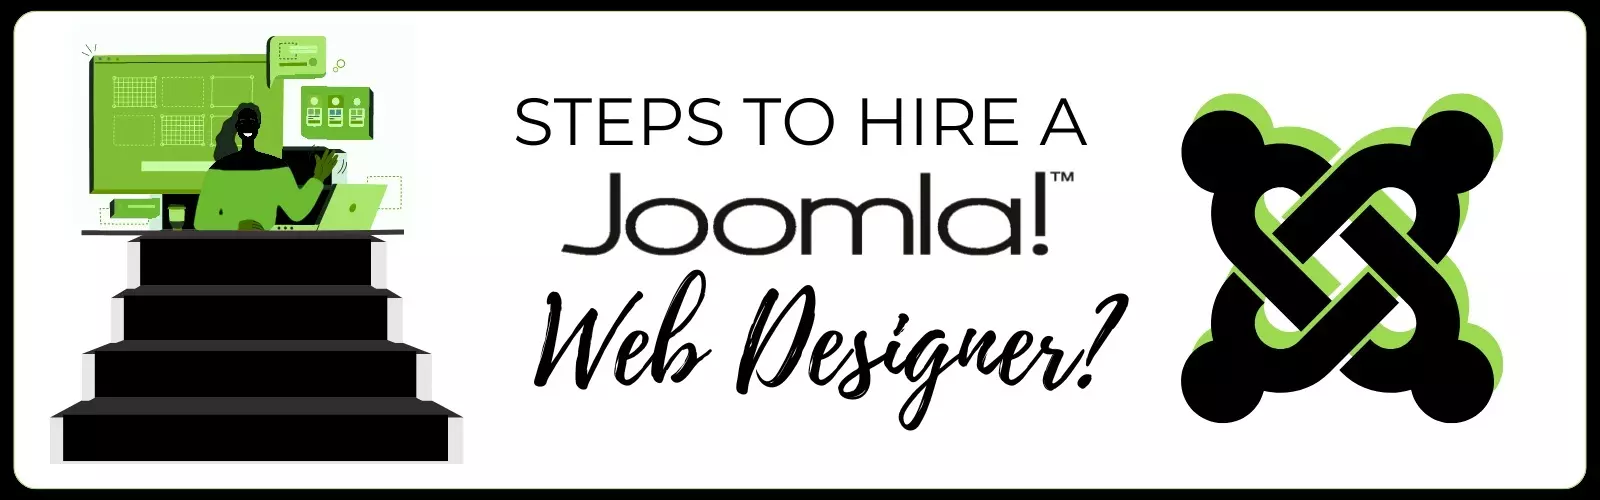 Before hiring a Joomla web designer, there are several factors you should consider. Here's a checklist to help you make an informed decision:  Website Goals: Assess your website goals and determine the specific features and functionalities you need. This will help you communicate your requirements to the Joomla web designer effectively.  Budget: Consider the budget you have set aside for your website development project. Compare the pricing and packages offered by different Joomla web design companies to find the best fit for your budget.  Timeline: Evaluate the timeline and timeframe for completing the Joomla web design project. Make sure the Joomla web designer can meet your desired deadline.  Digital Industry Research: Look for a Joomla web designer who understands your industry and target audience. They should be able to do research into your field so they are designing a website that speaks to that audience.  Communication and Collaboration: Communication is key throughout the design process. Ensure that the Joomla web designer is easy to communicate with and values collaboration. This will make the entire experience smoother and more efficient.  Steps to Hire a Joomla Web Designer for Your Website Development